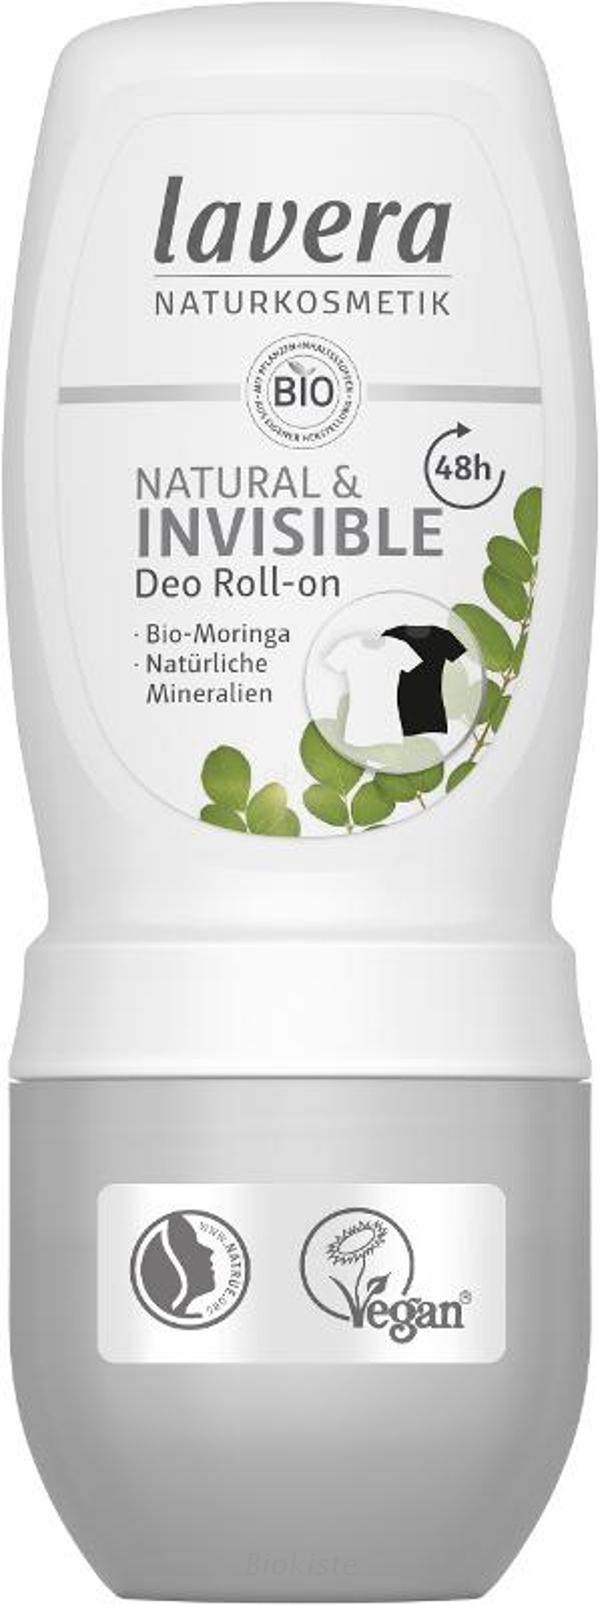 Produktfoto zu Deo Roll on Invisible 50 ml